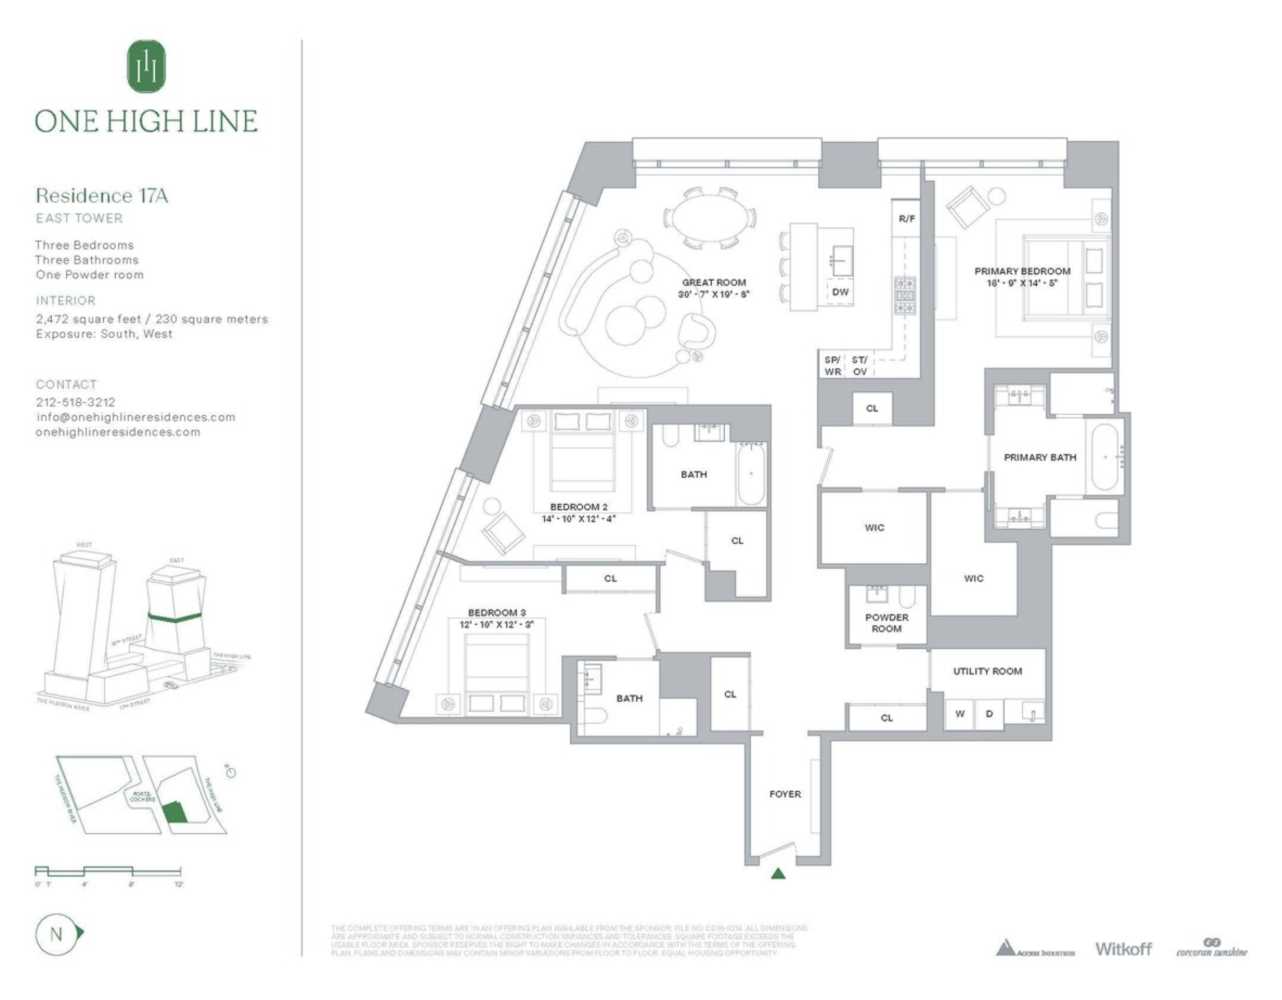 Floorplan for 500 West 18th Street East 17A